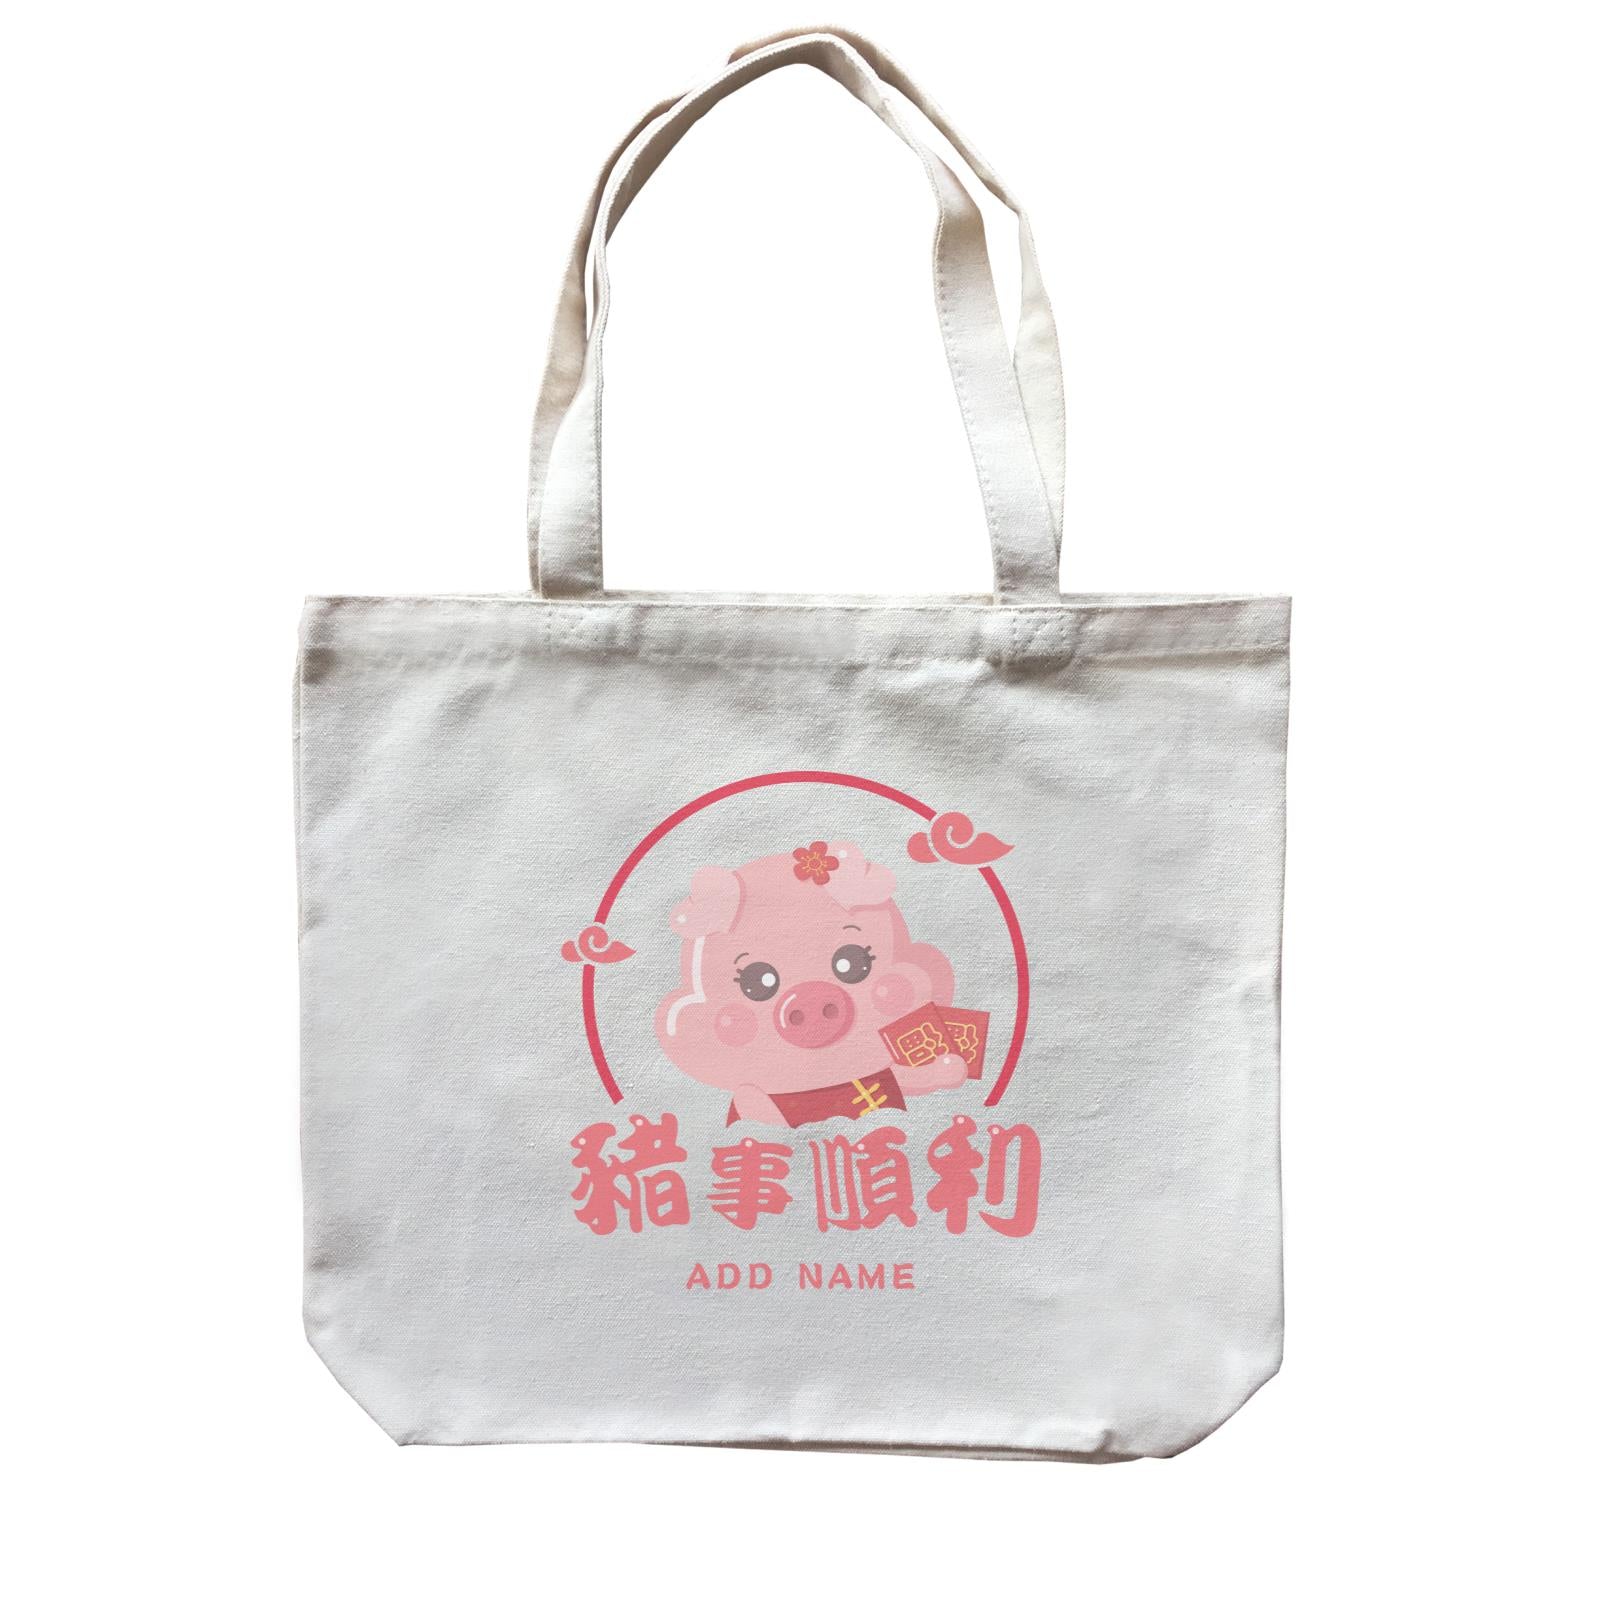 Chinese New Year Cute Pig Emblem Girl Accessories With Addname Canvas Bag